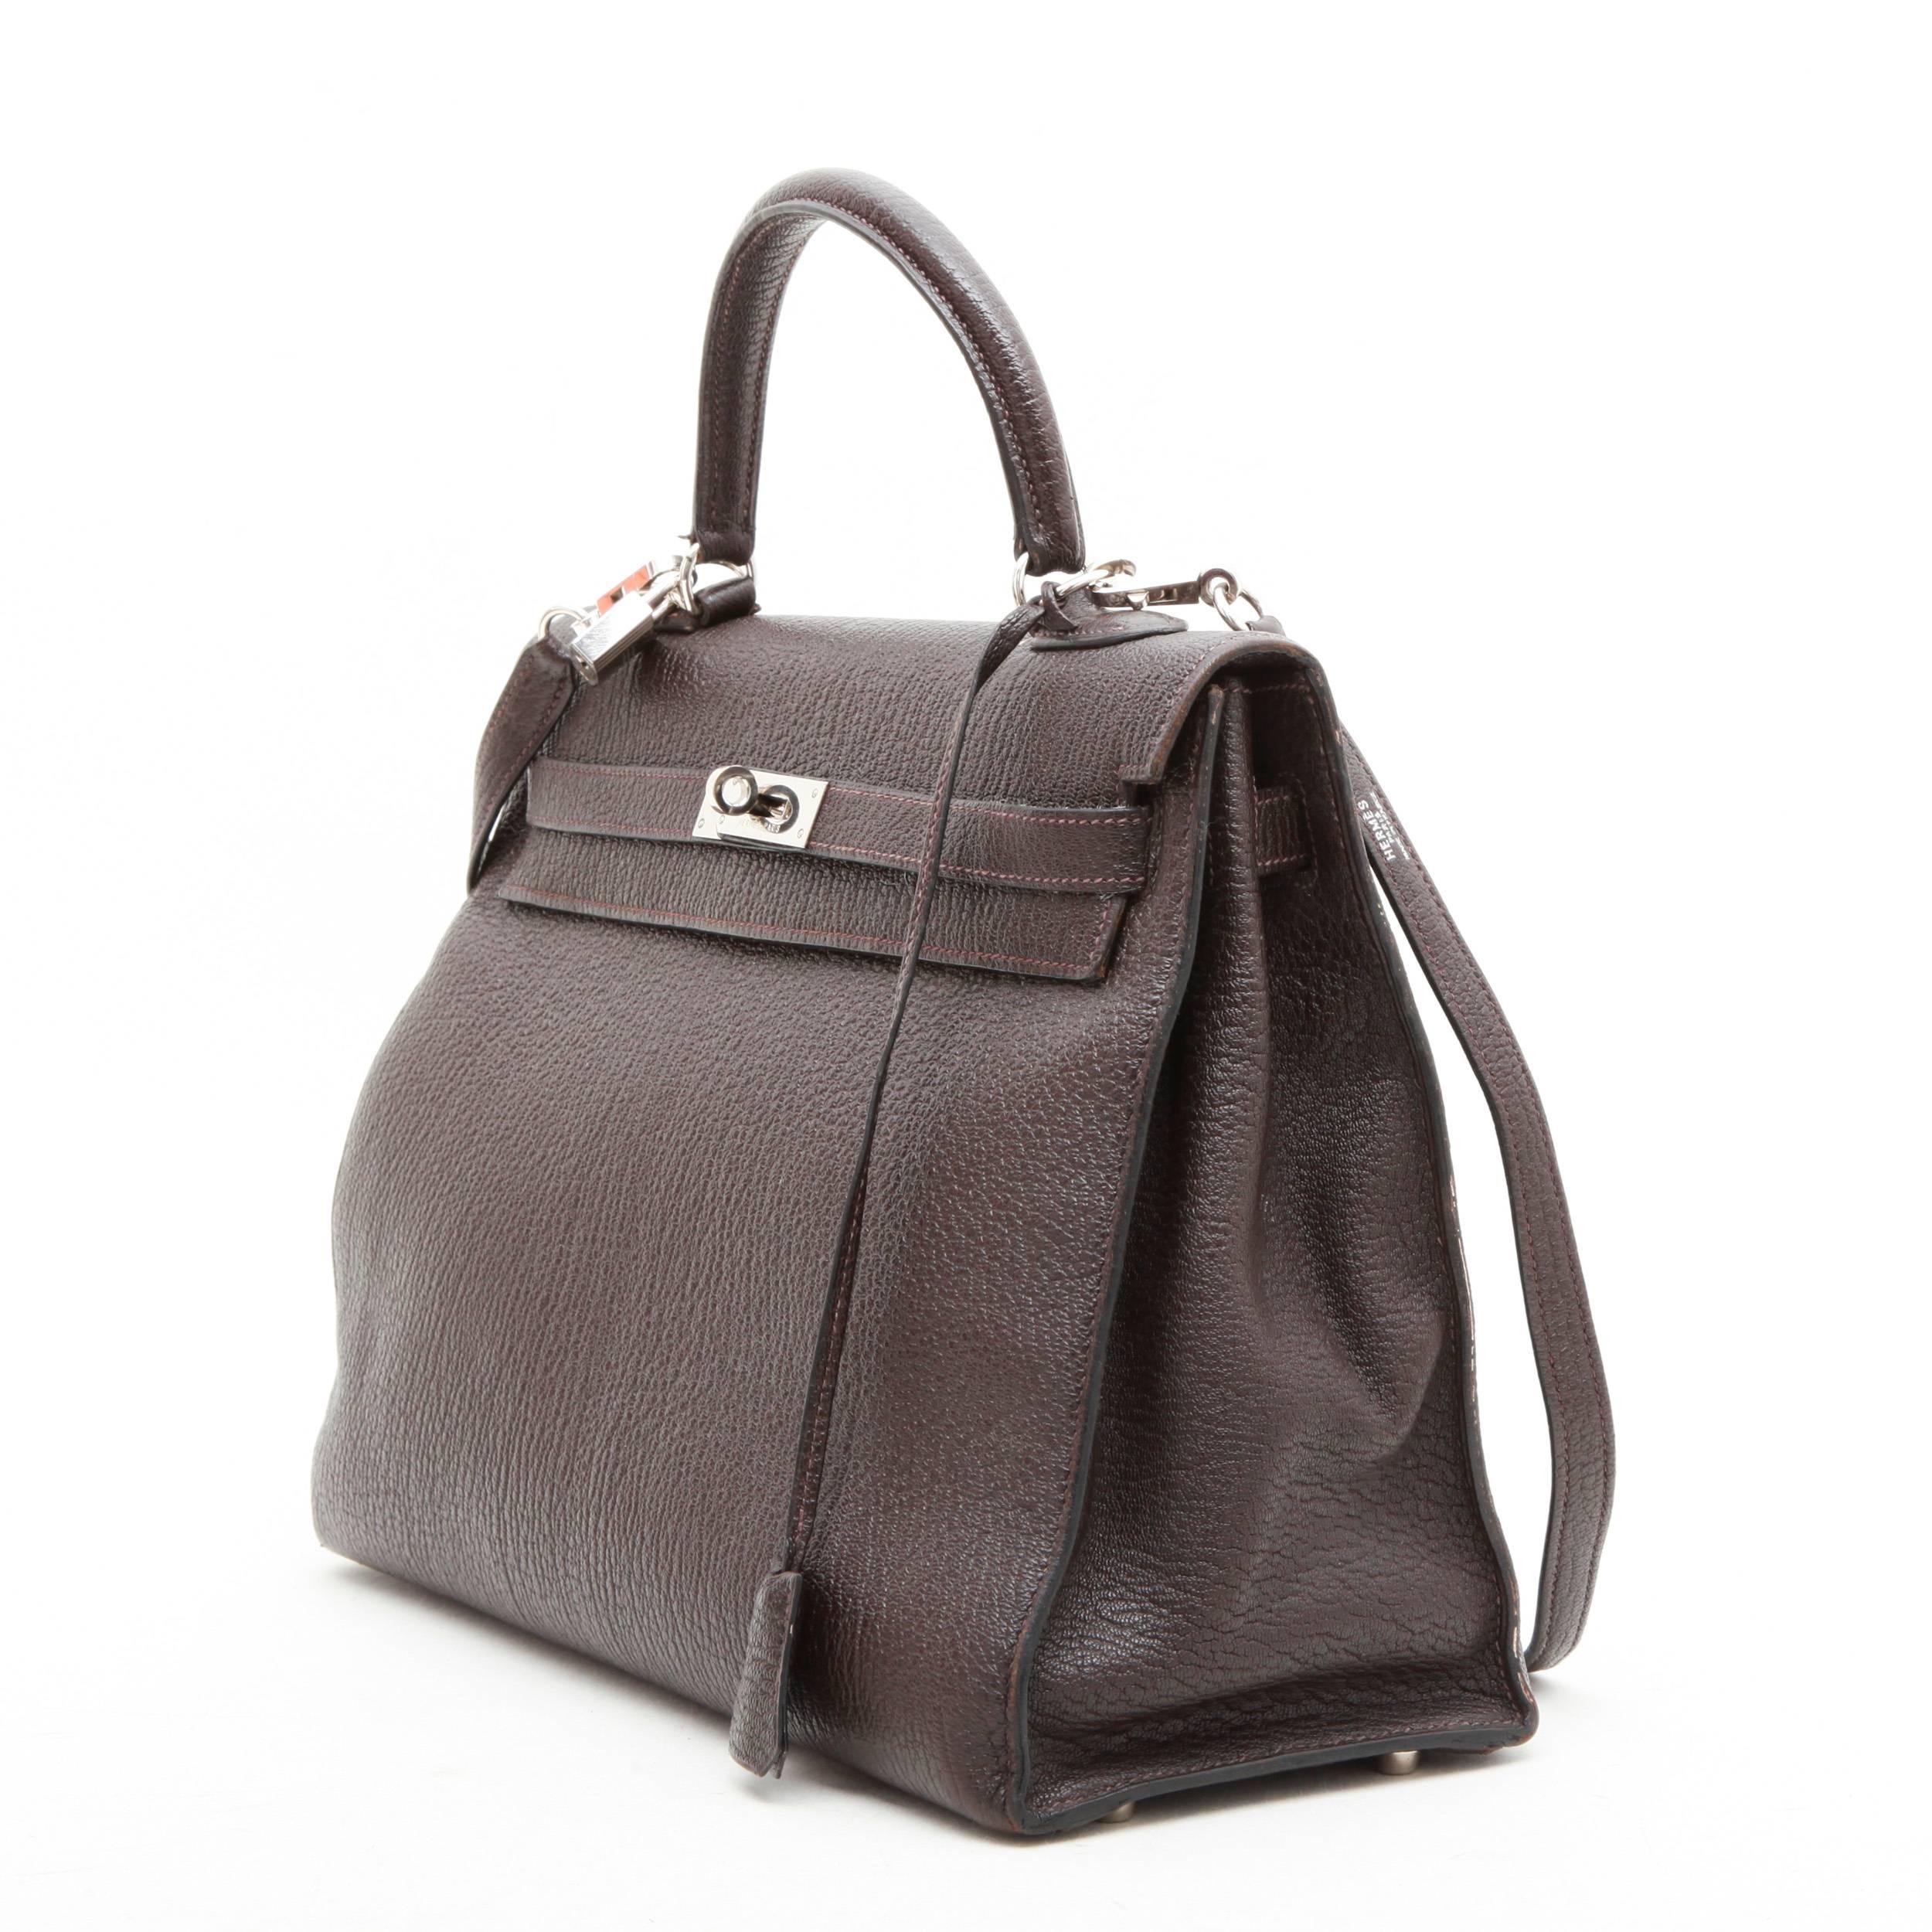 Hermès Kelly II T35 saddle stitch bag in brown grained leather. 
Stamp H in a square year 2004. Silver palladium metal hardware with micro scratches. 
Included : Zipper, clochette, padlock and keys. 

Worn by hand or shoulder with a shoulder strap